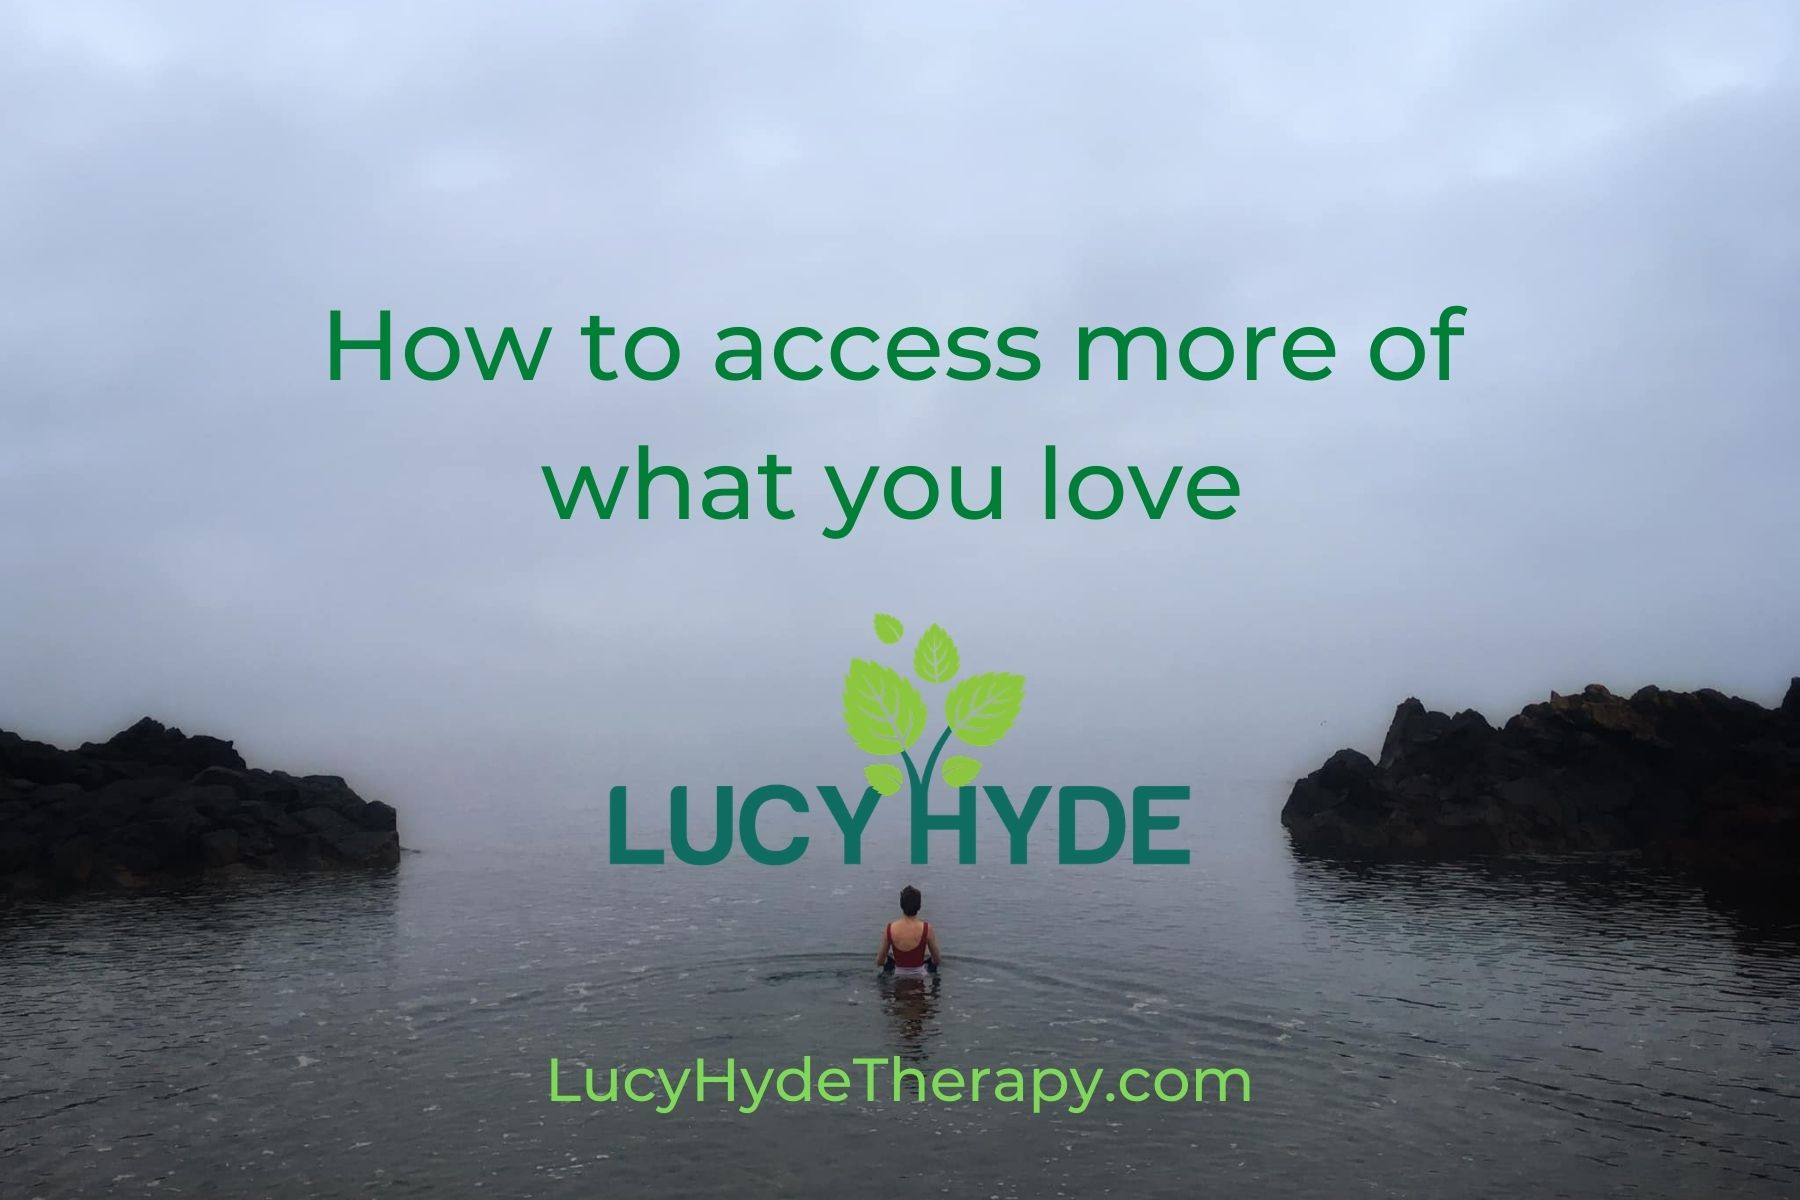 How to access more of what you love